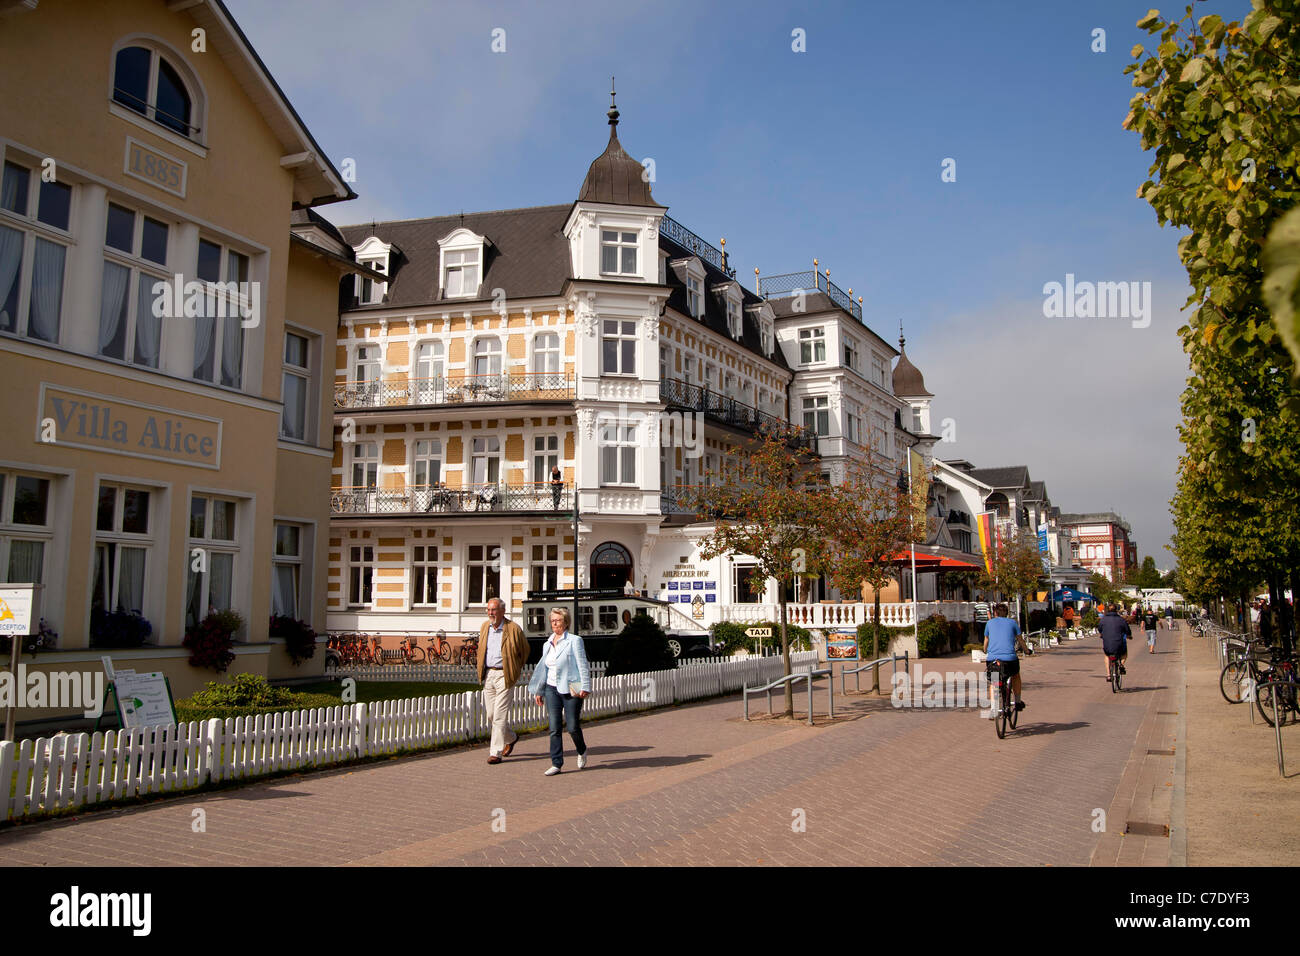 special historist style Architecture Baederarchitektur and the promenade at the seaside resort Ahlbeck, Usedom island, germany Stock Photo